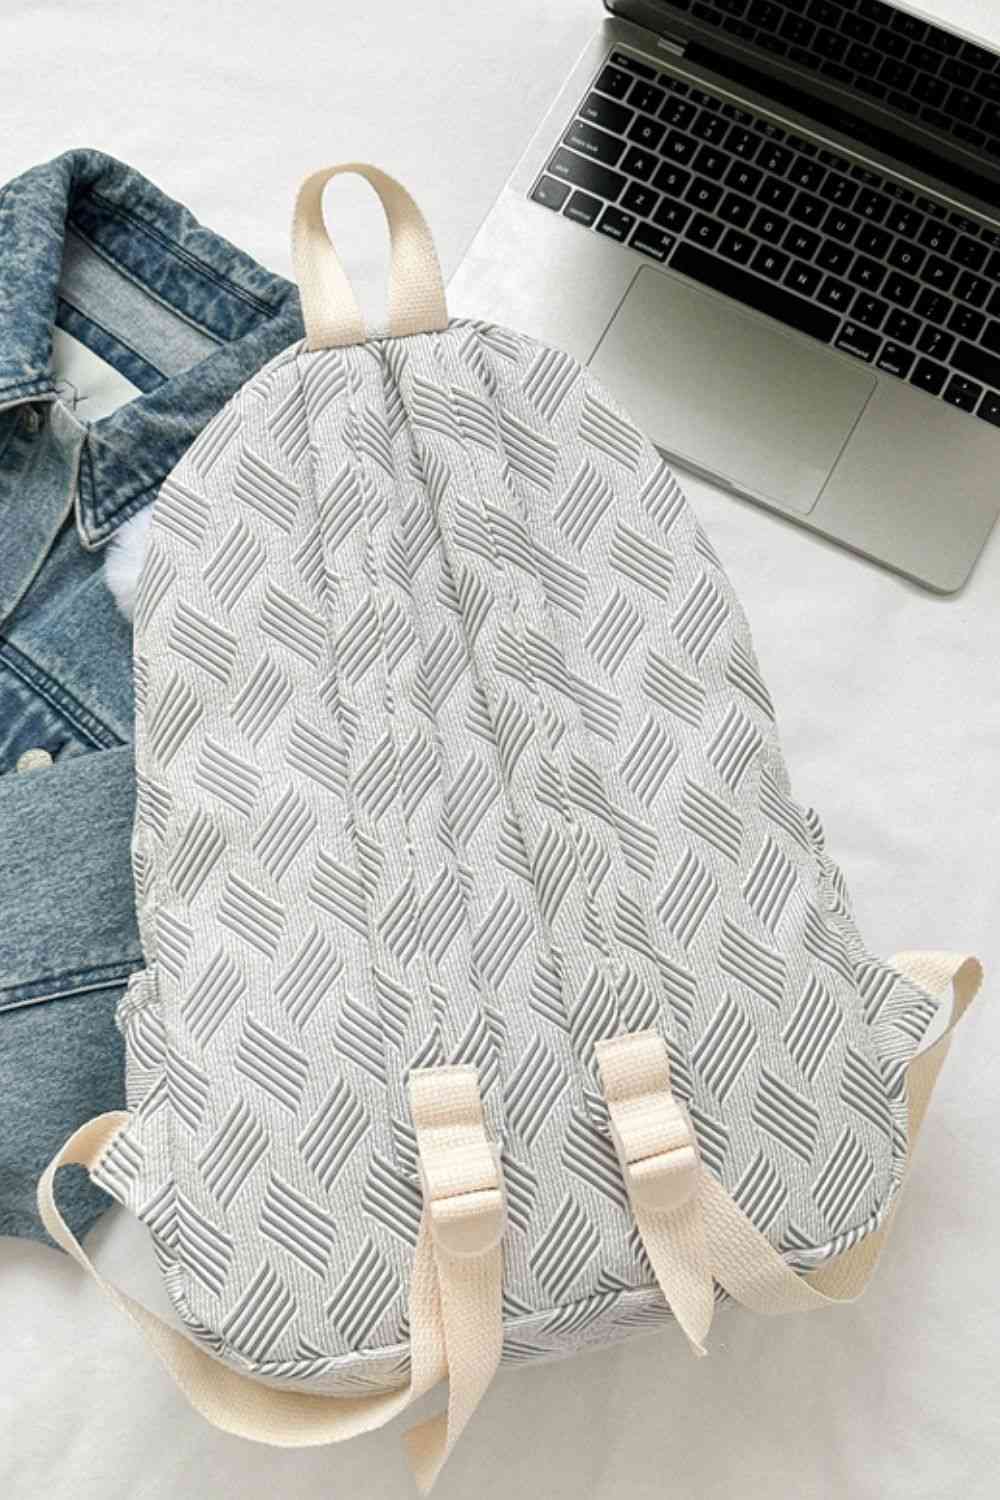 Printed Polyester Large Backpack (Fluffy Ball Included) Trendsi